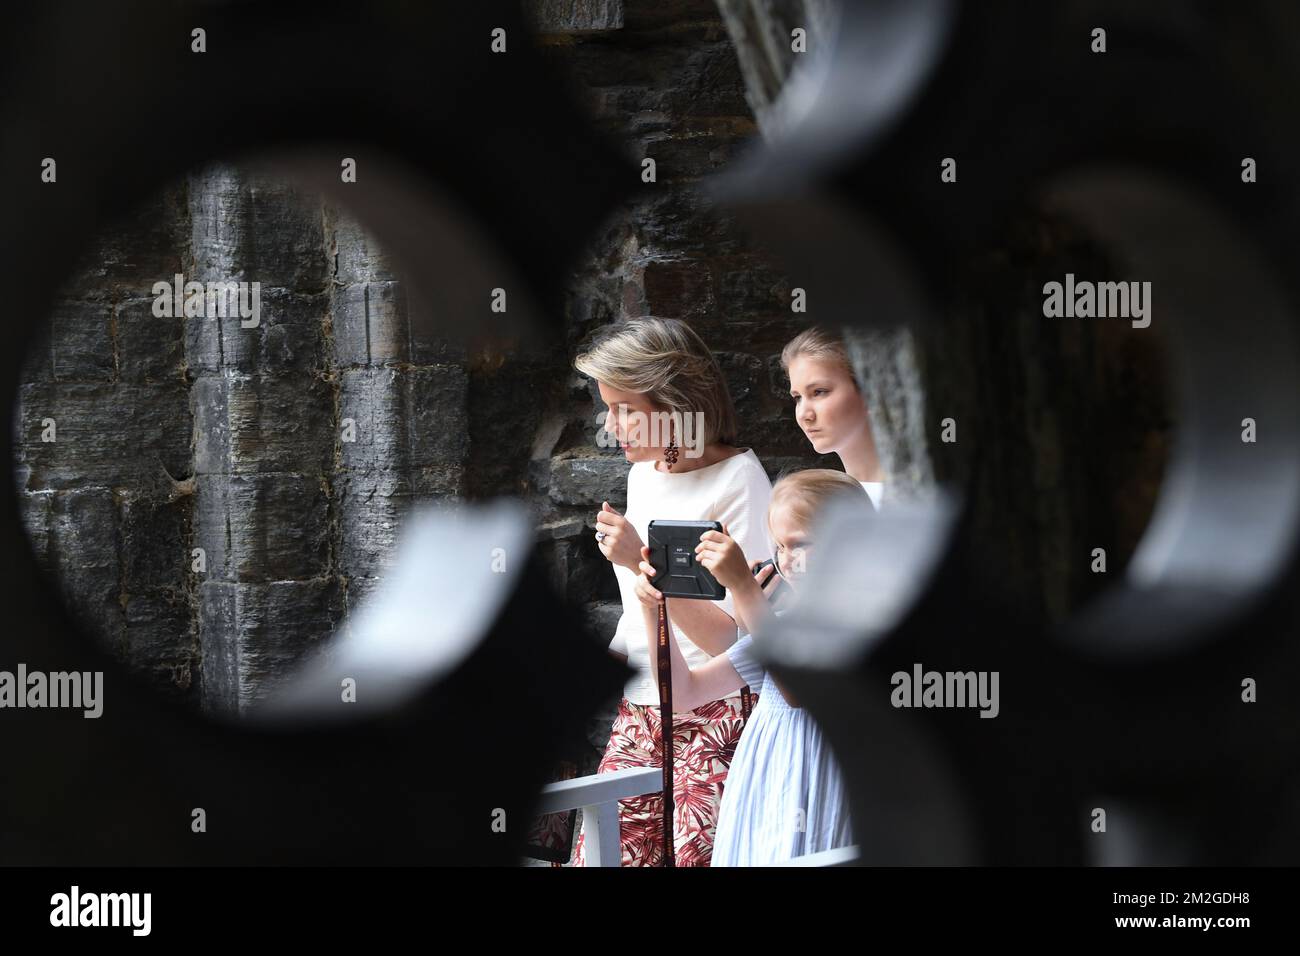 Queen Mathilde of Belgium and Crown Princess Elisabeth pictured during a photoshoot of the Belgian Royal Family's vacation at the Villers Abbey in Villers-la-Ville, Sunday 24 June 2018. BELGA PHOTO POOL FREDERIC SIERAKOWSKI  Stock Photo